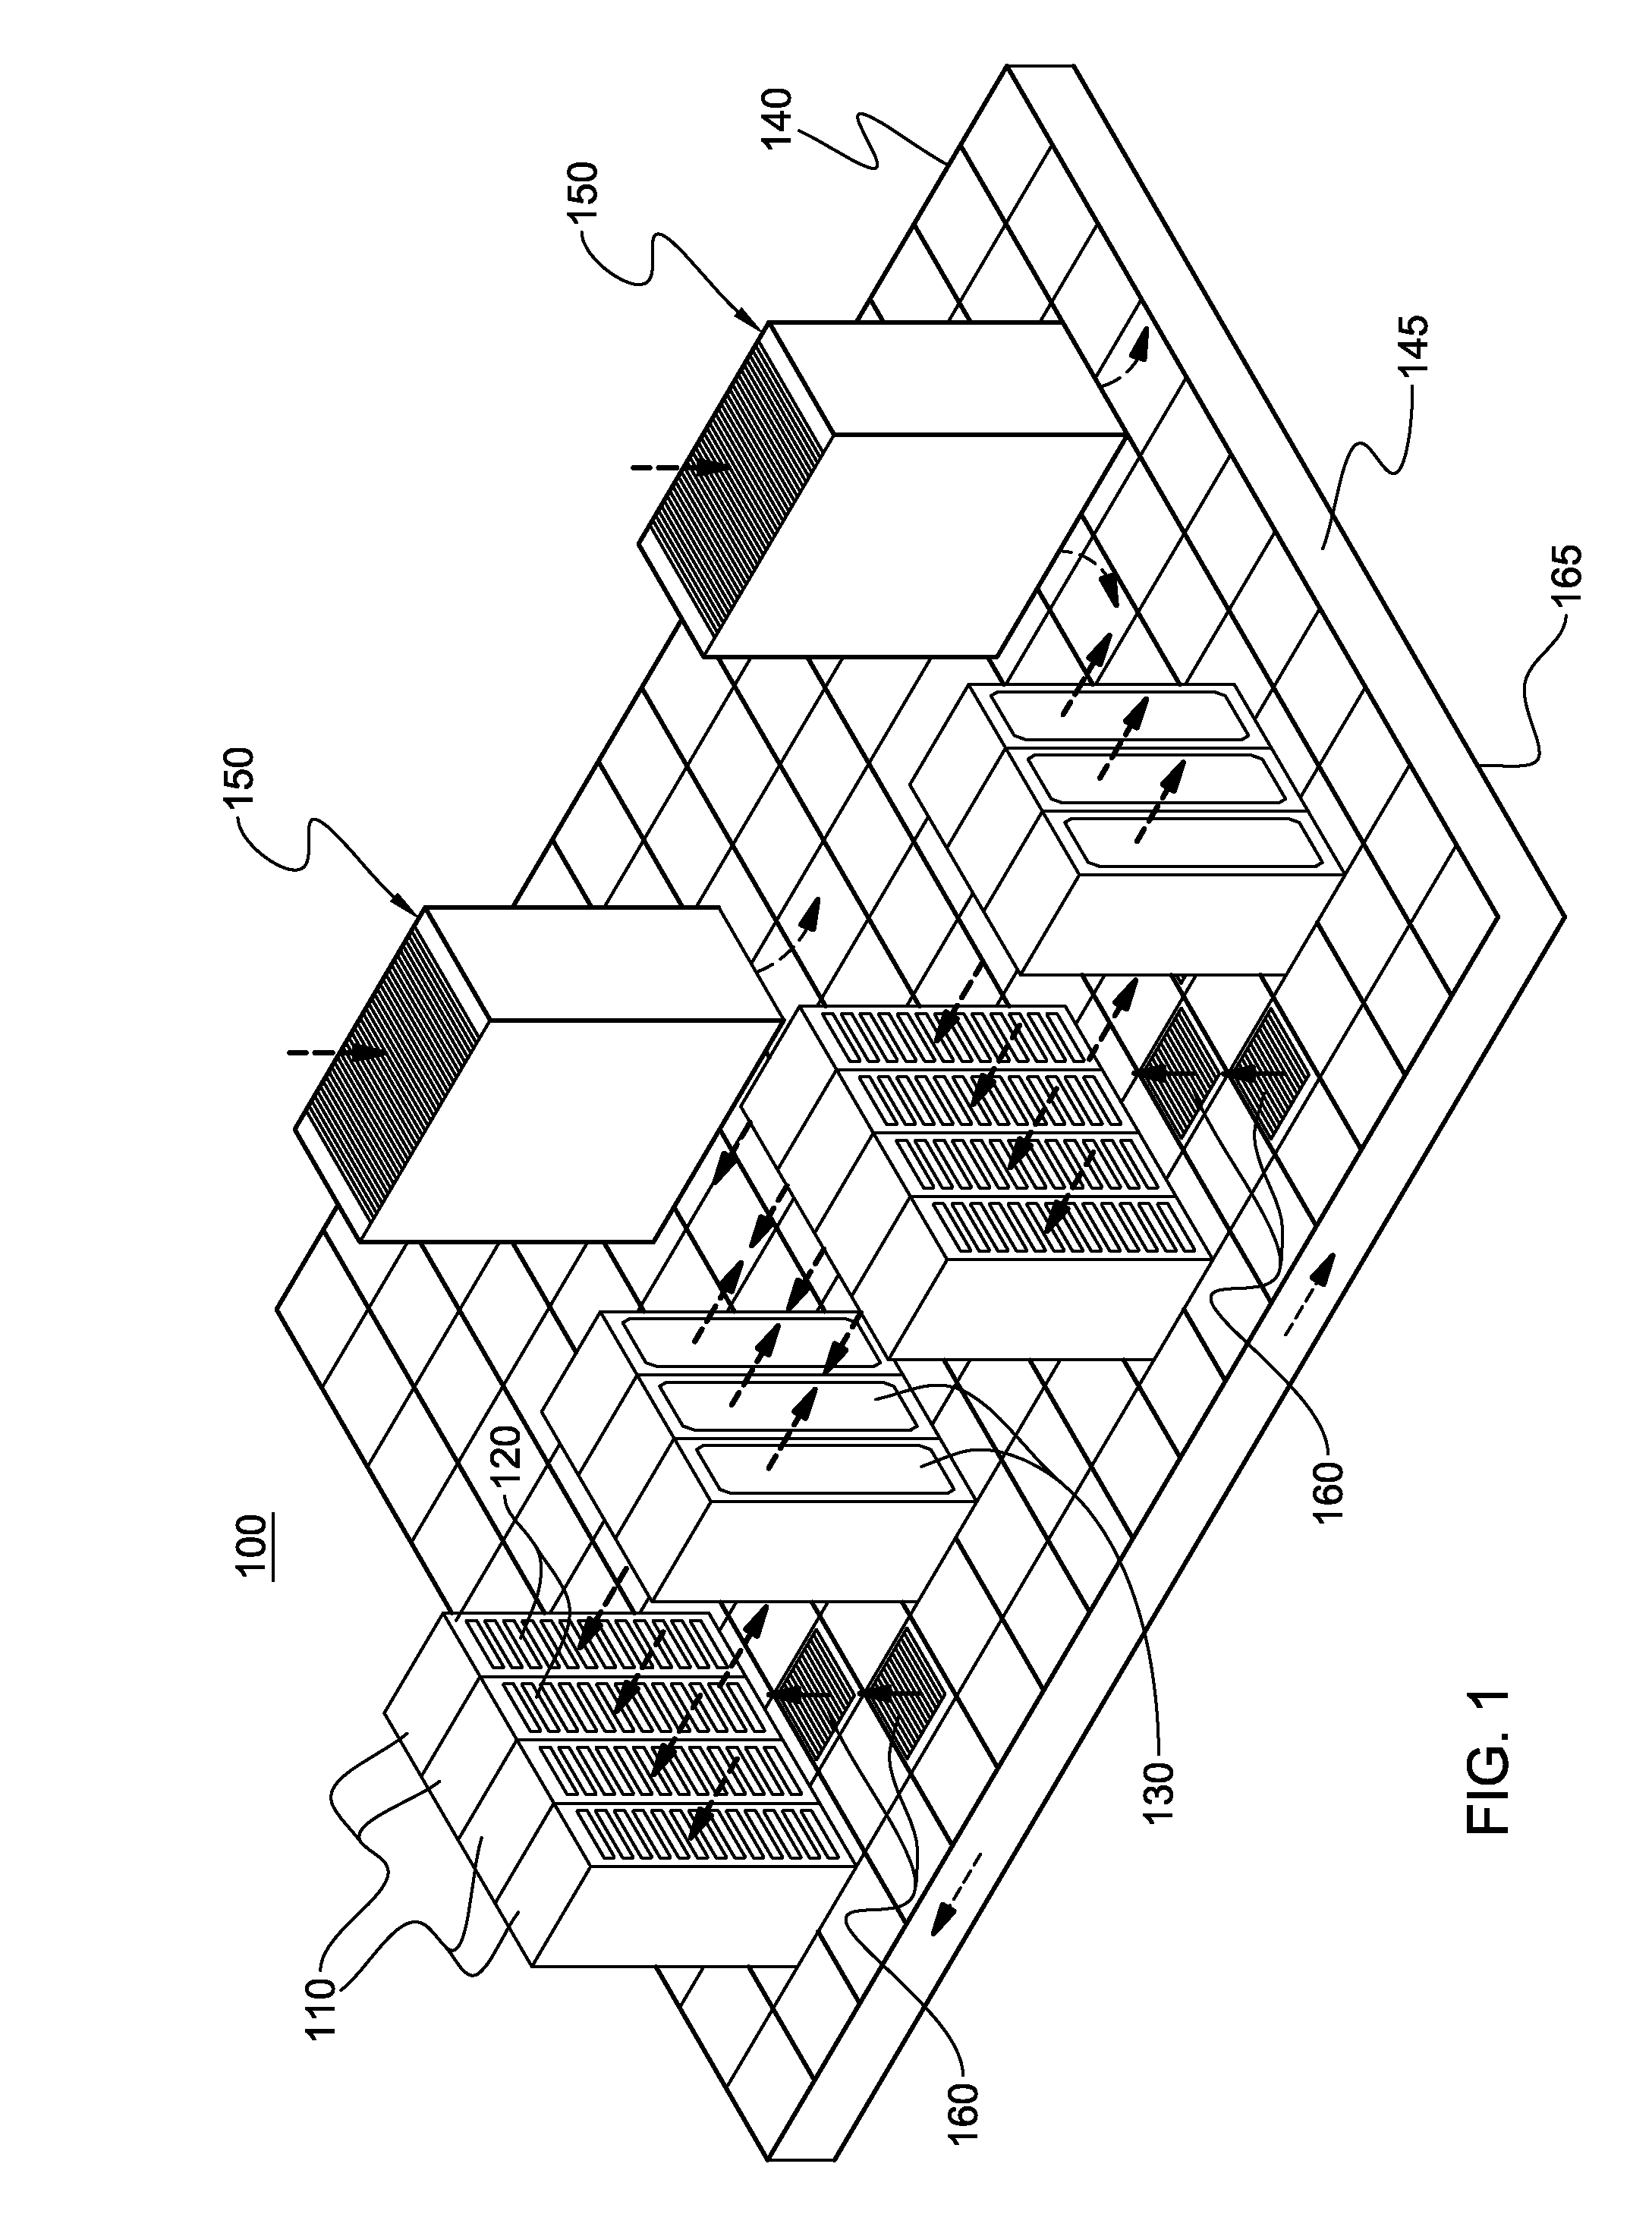 Condenser block structures with cavities facilitating vapor condensation cooling of coolant